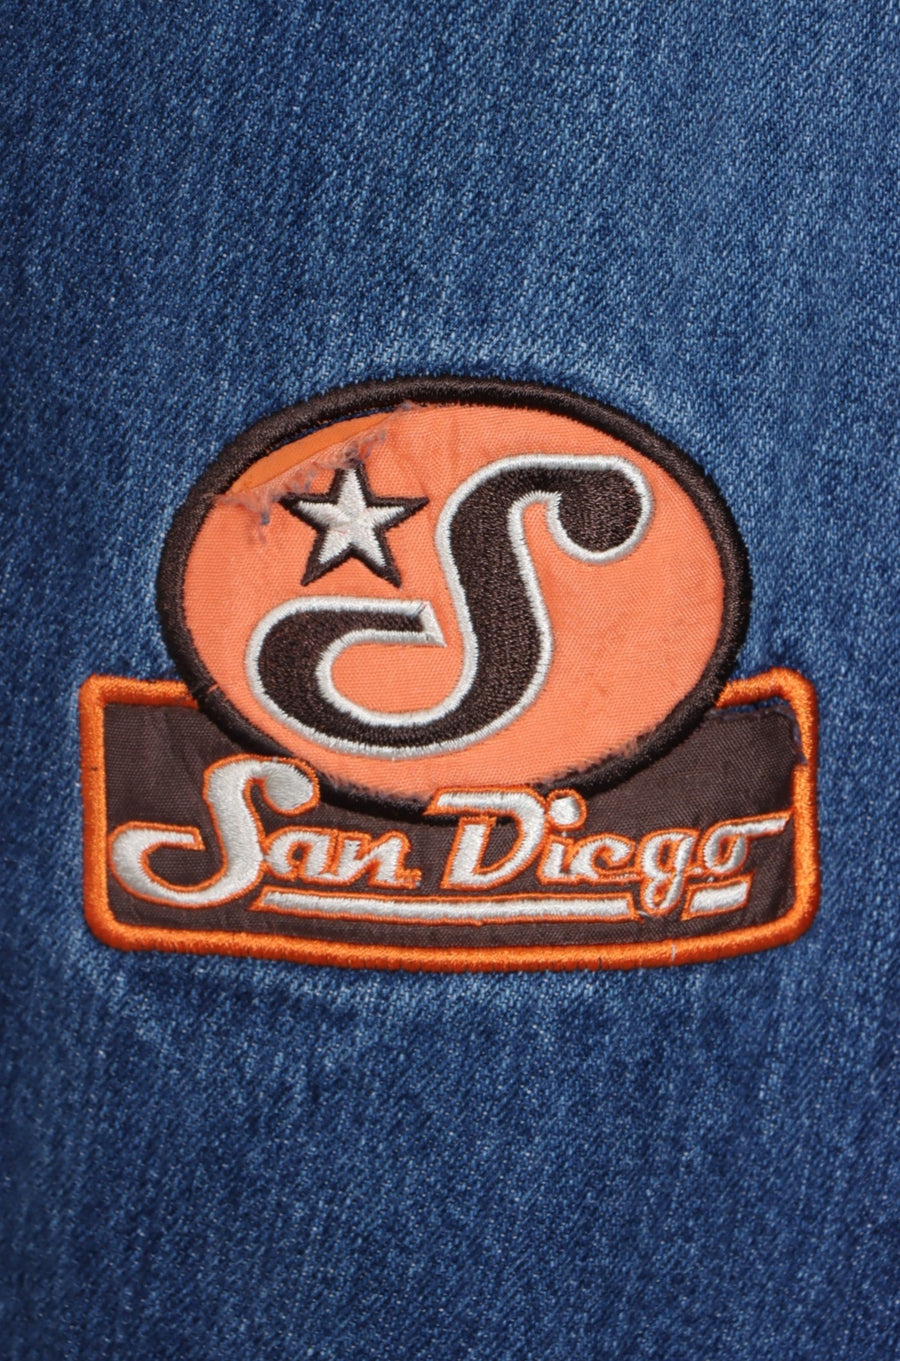 NBA Inspired 'All Stars' Team Patches Jeans (38 x 32) - Vintage Sole Melbourne